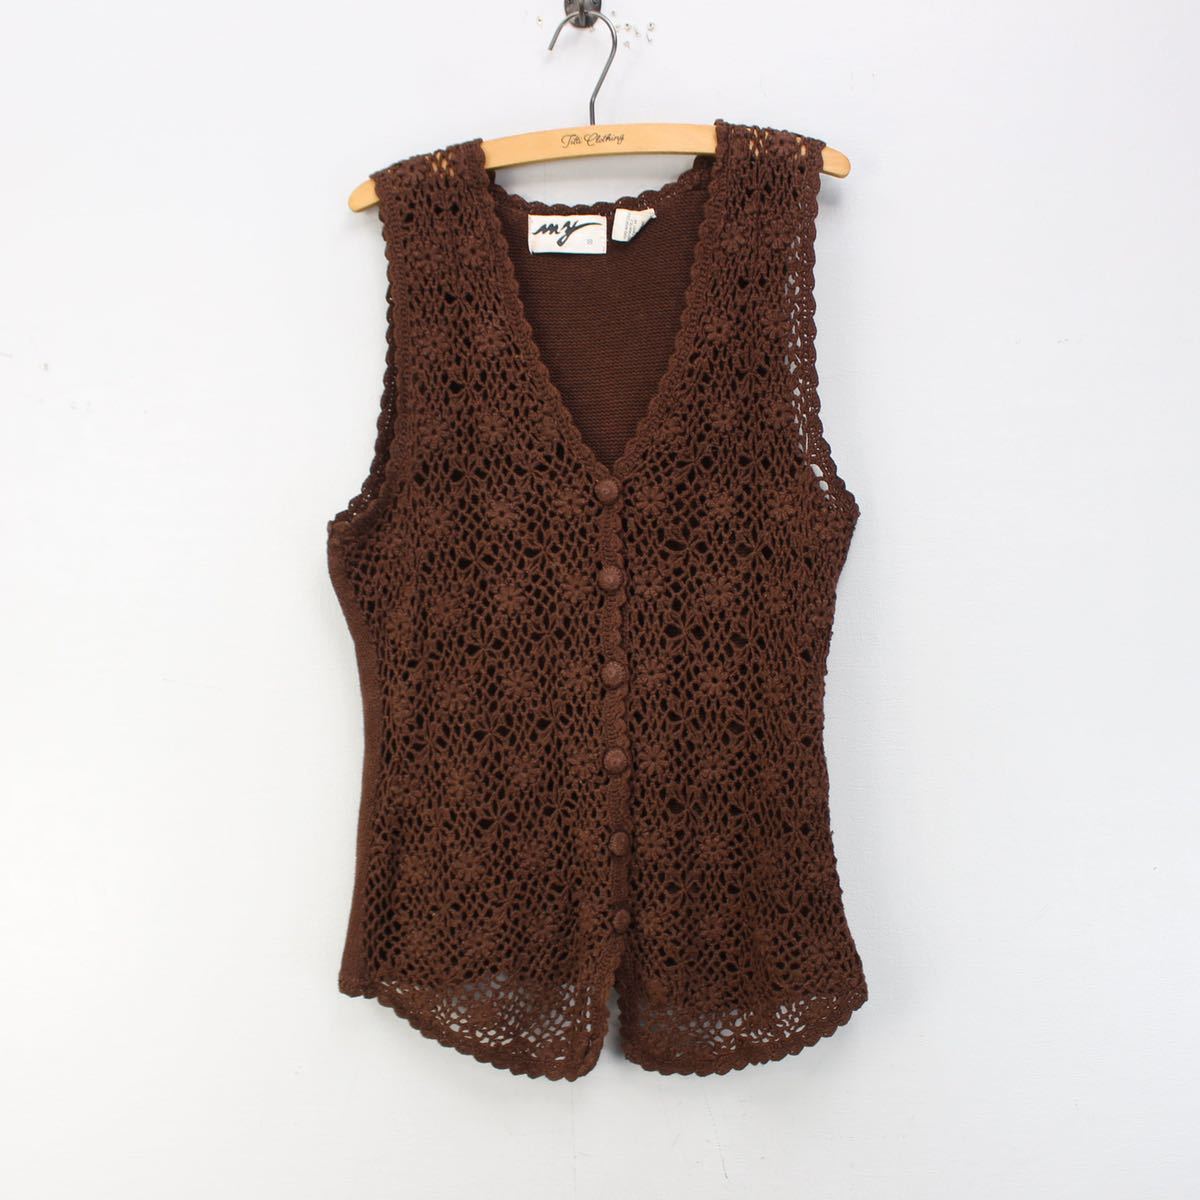 USA VINTAGE FLOWER PATTERNED EMBROIDERY KNIT VEST/アメリカ古着お花刺繍ニットベスト_画像4